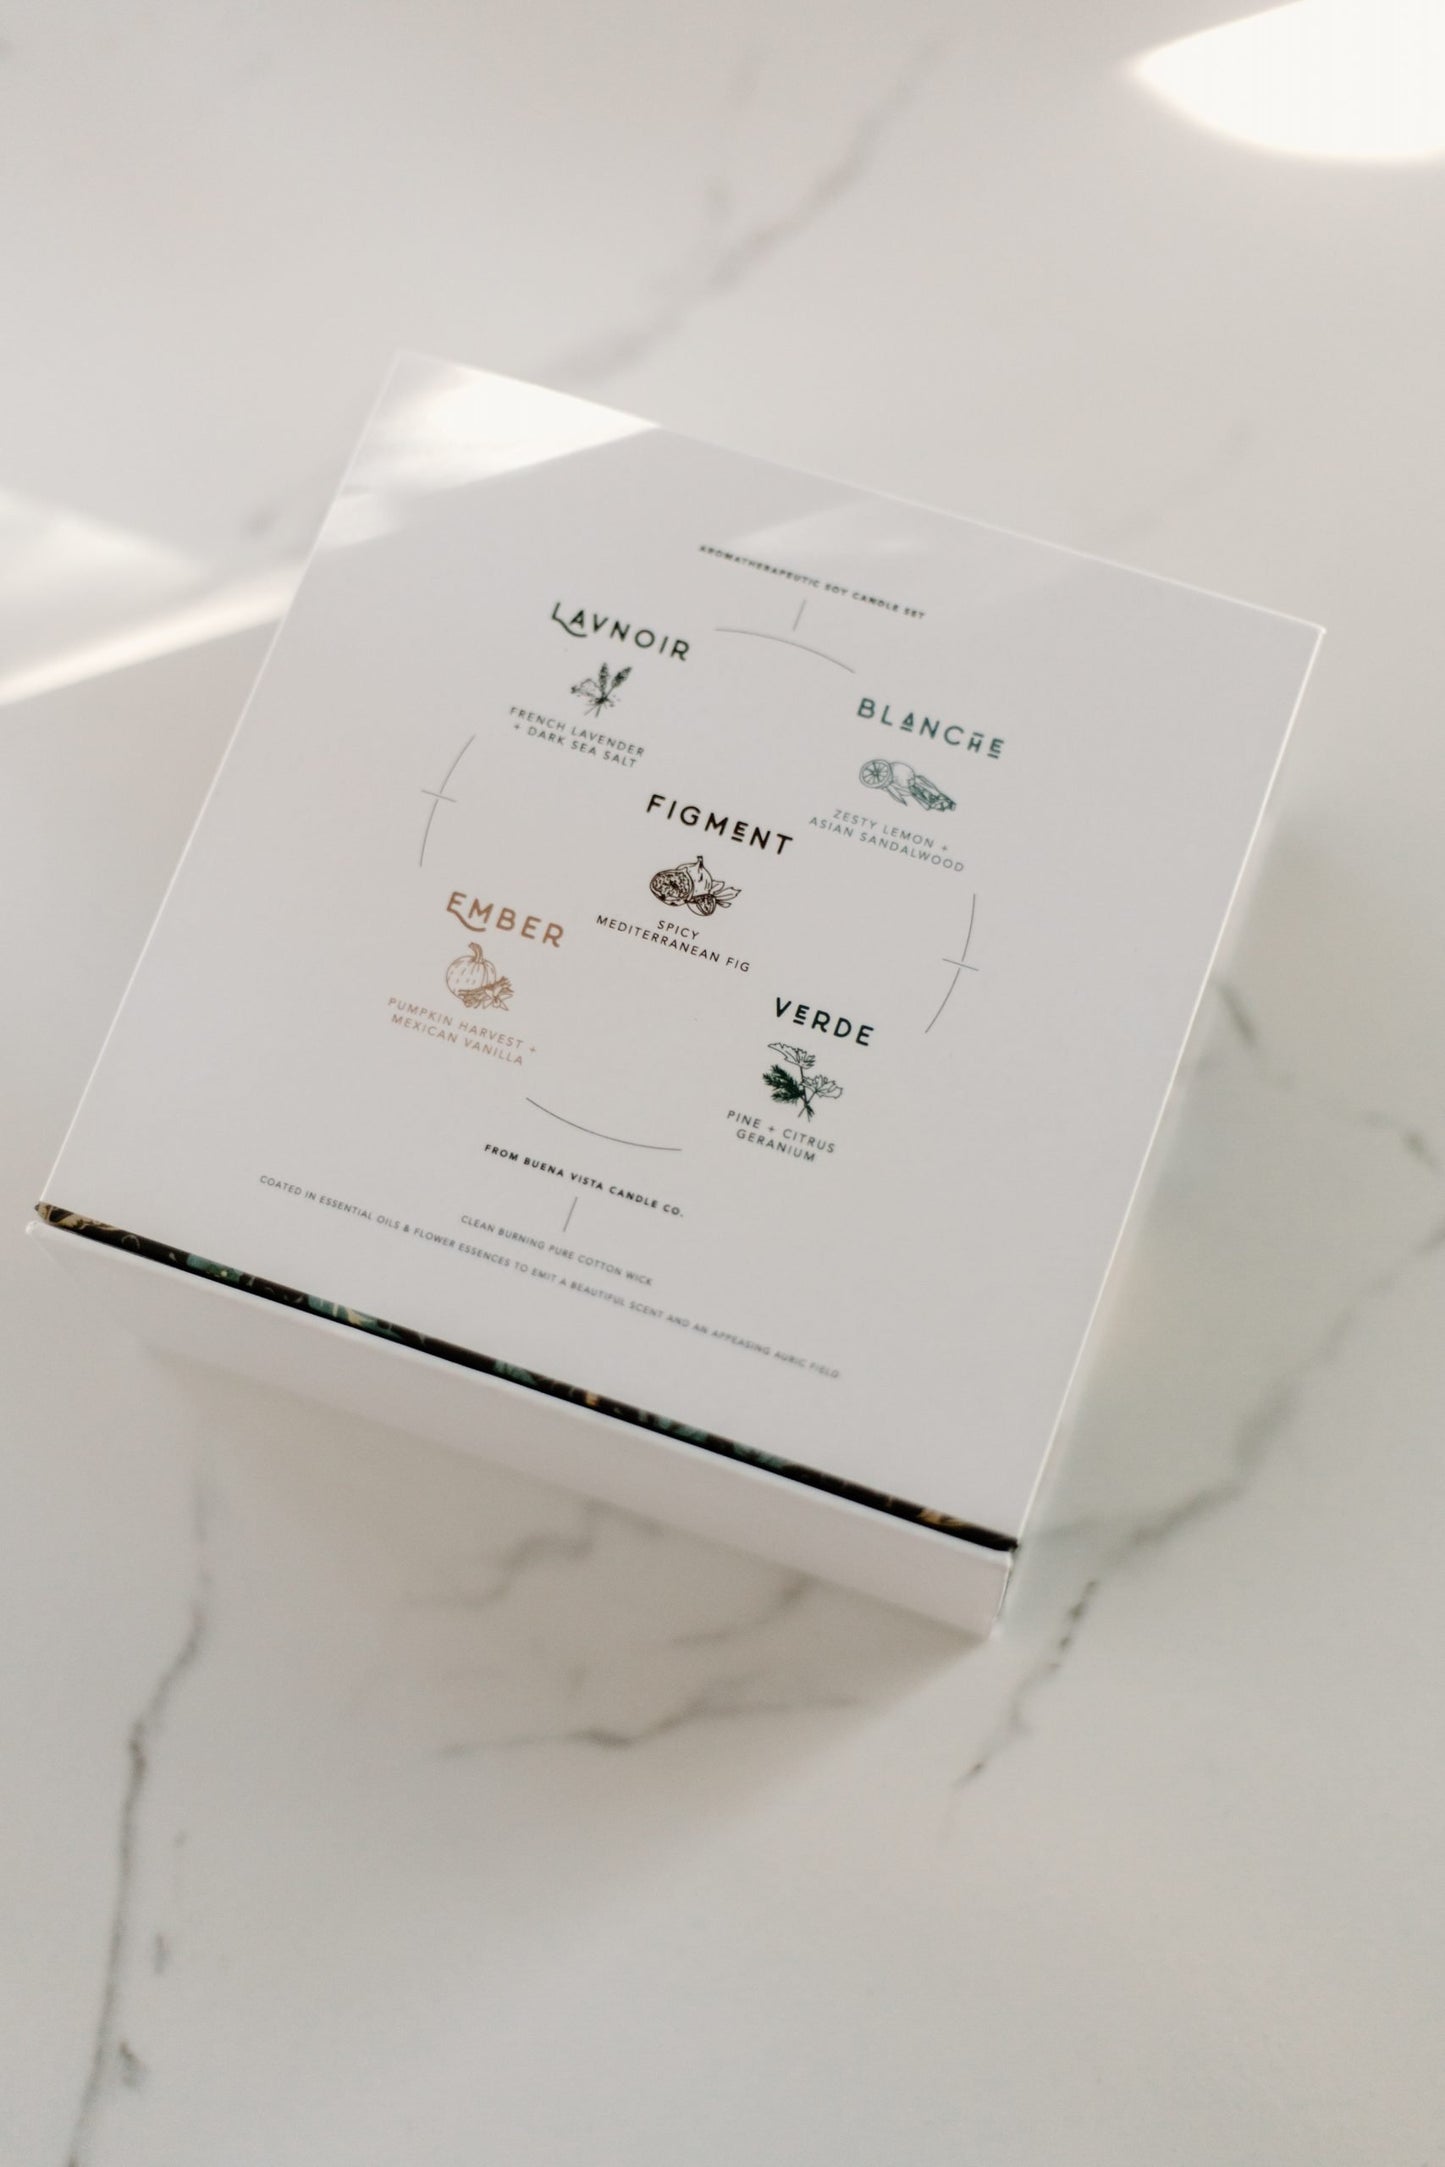 Amber Luxe Candle Gift Box